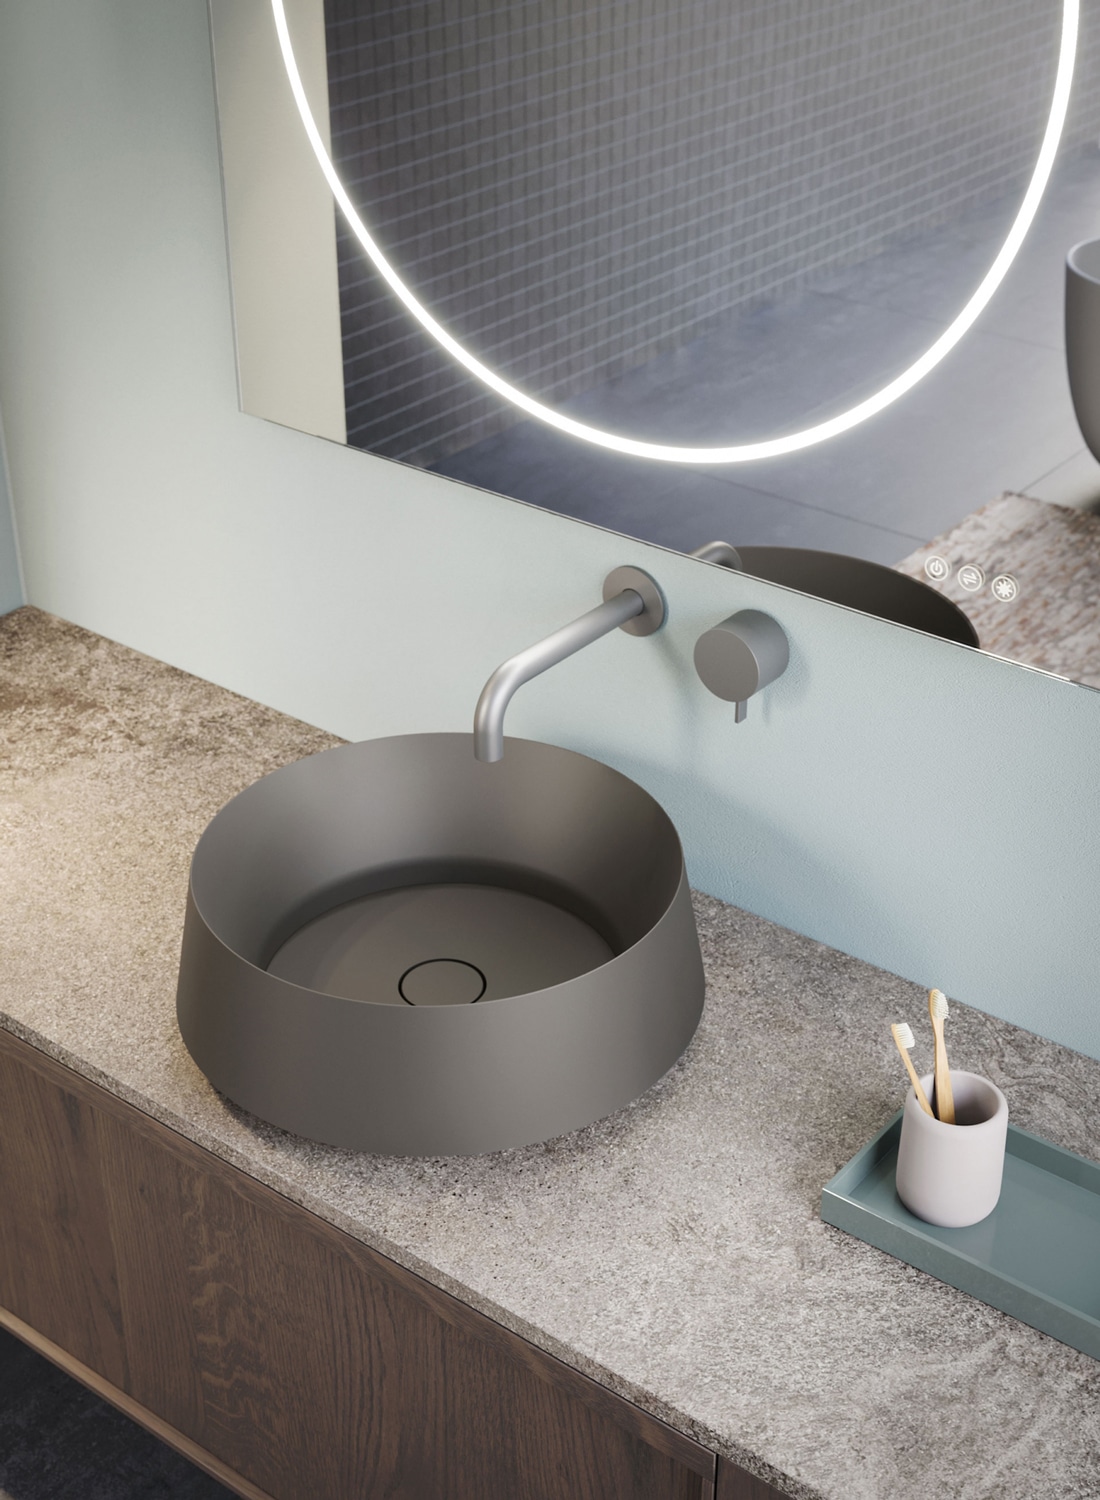 Vulcan washbasin available in matte white or colored Teknorit.